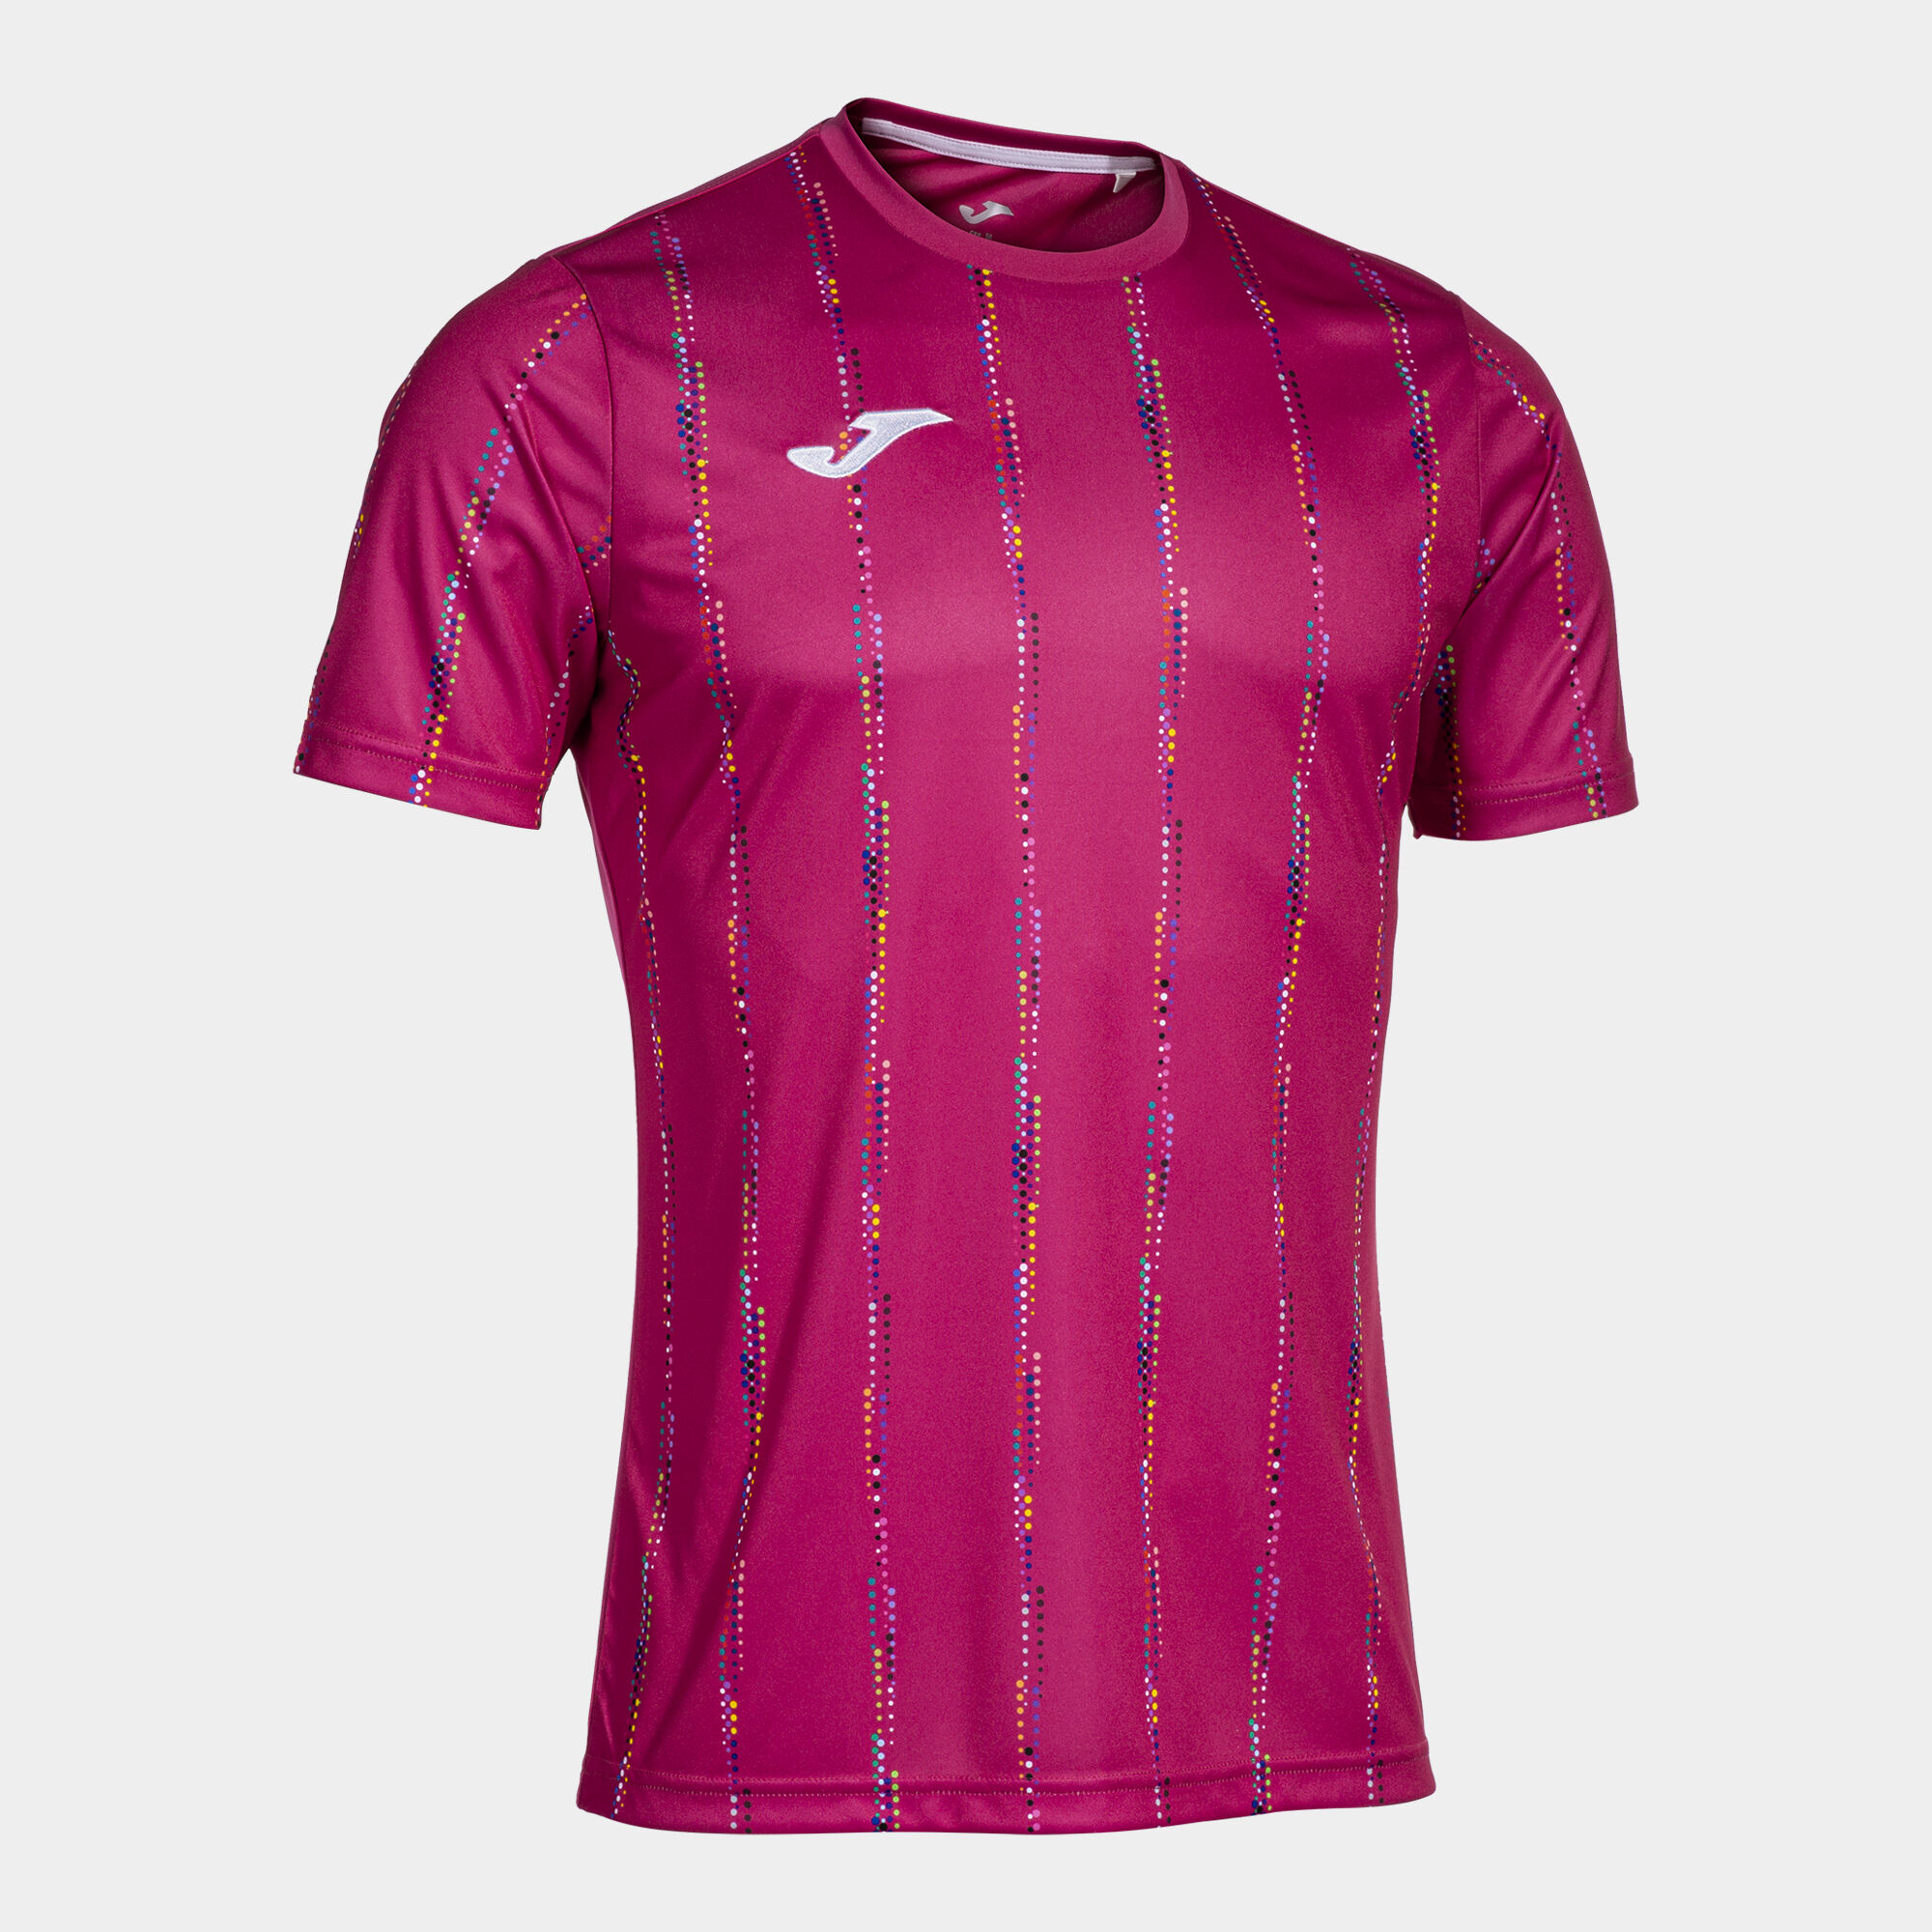 Maillot manches courtes homme Pro team fuchsia